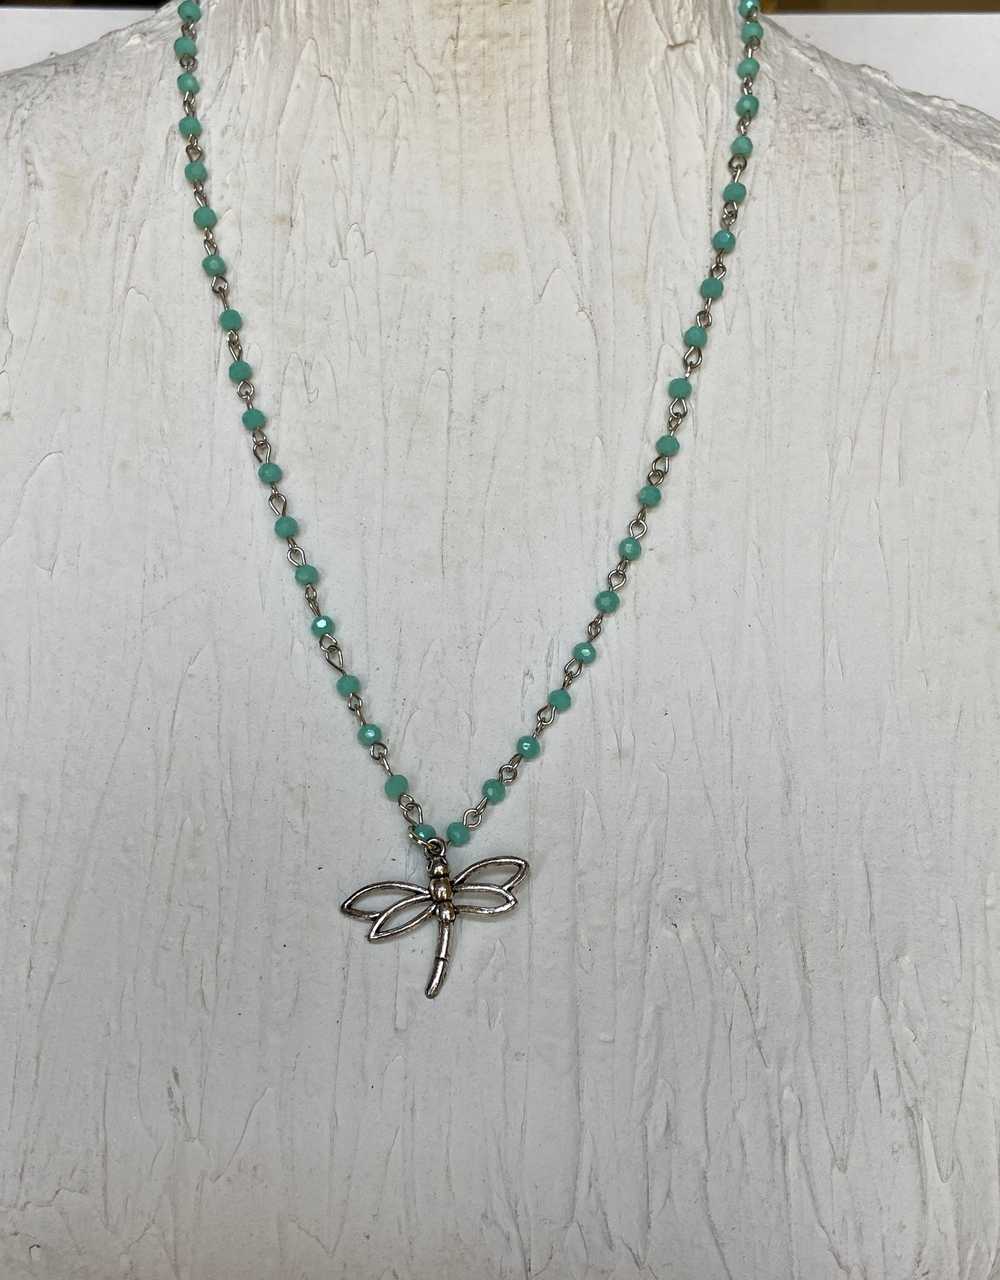 Dragonfly necklace - image 6